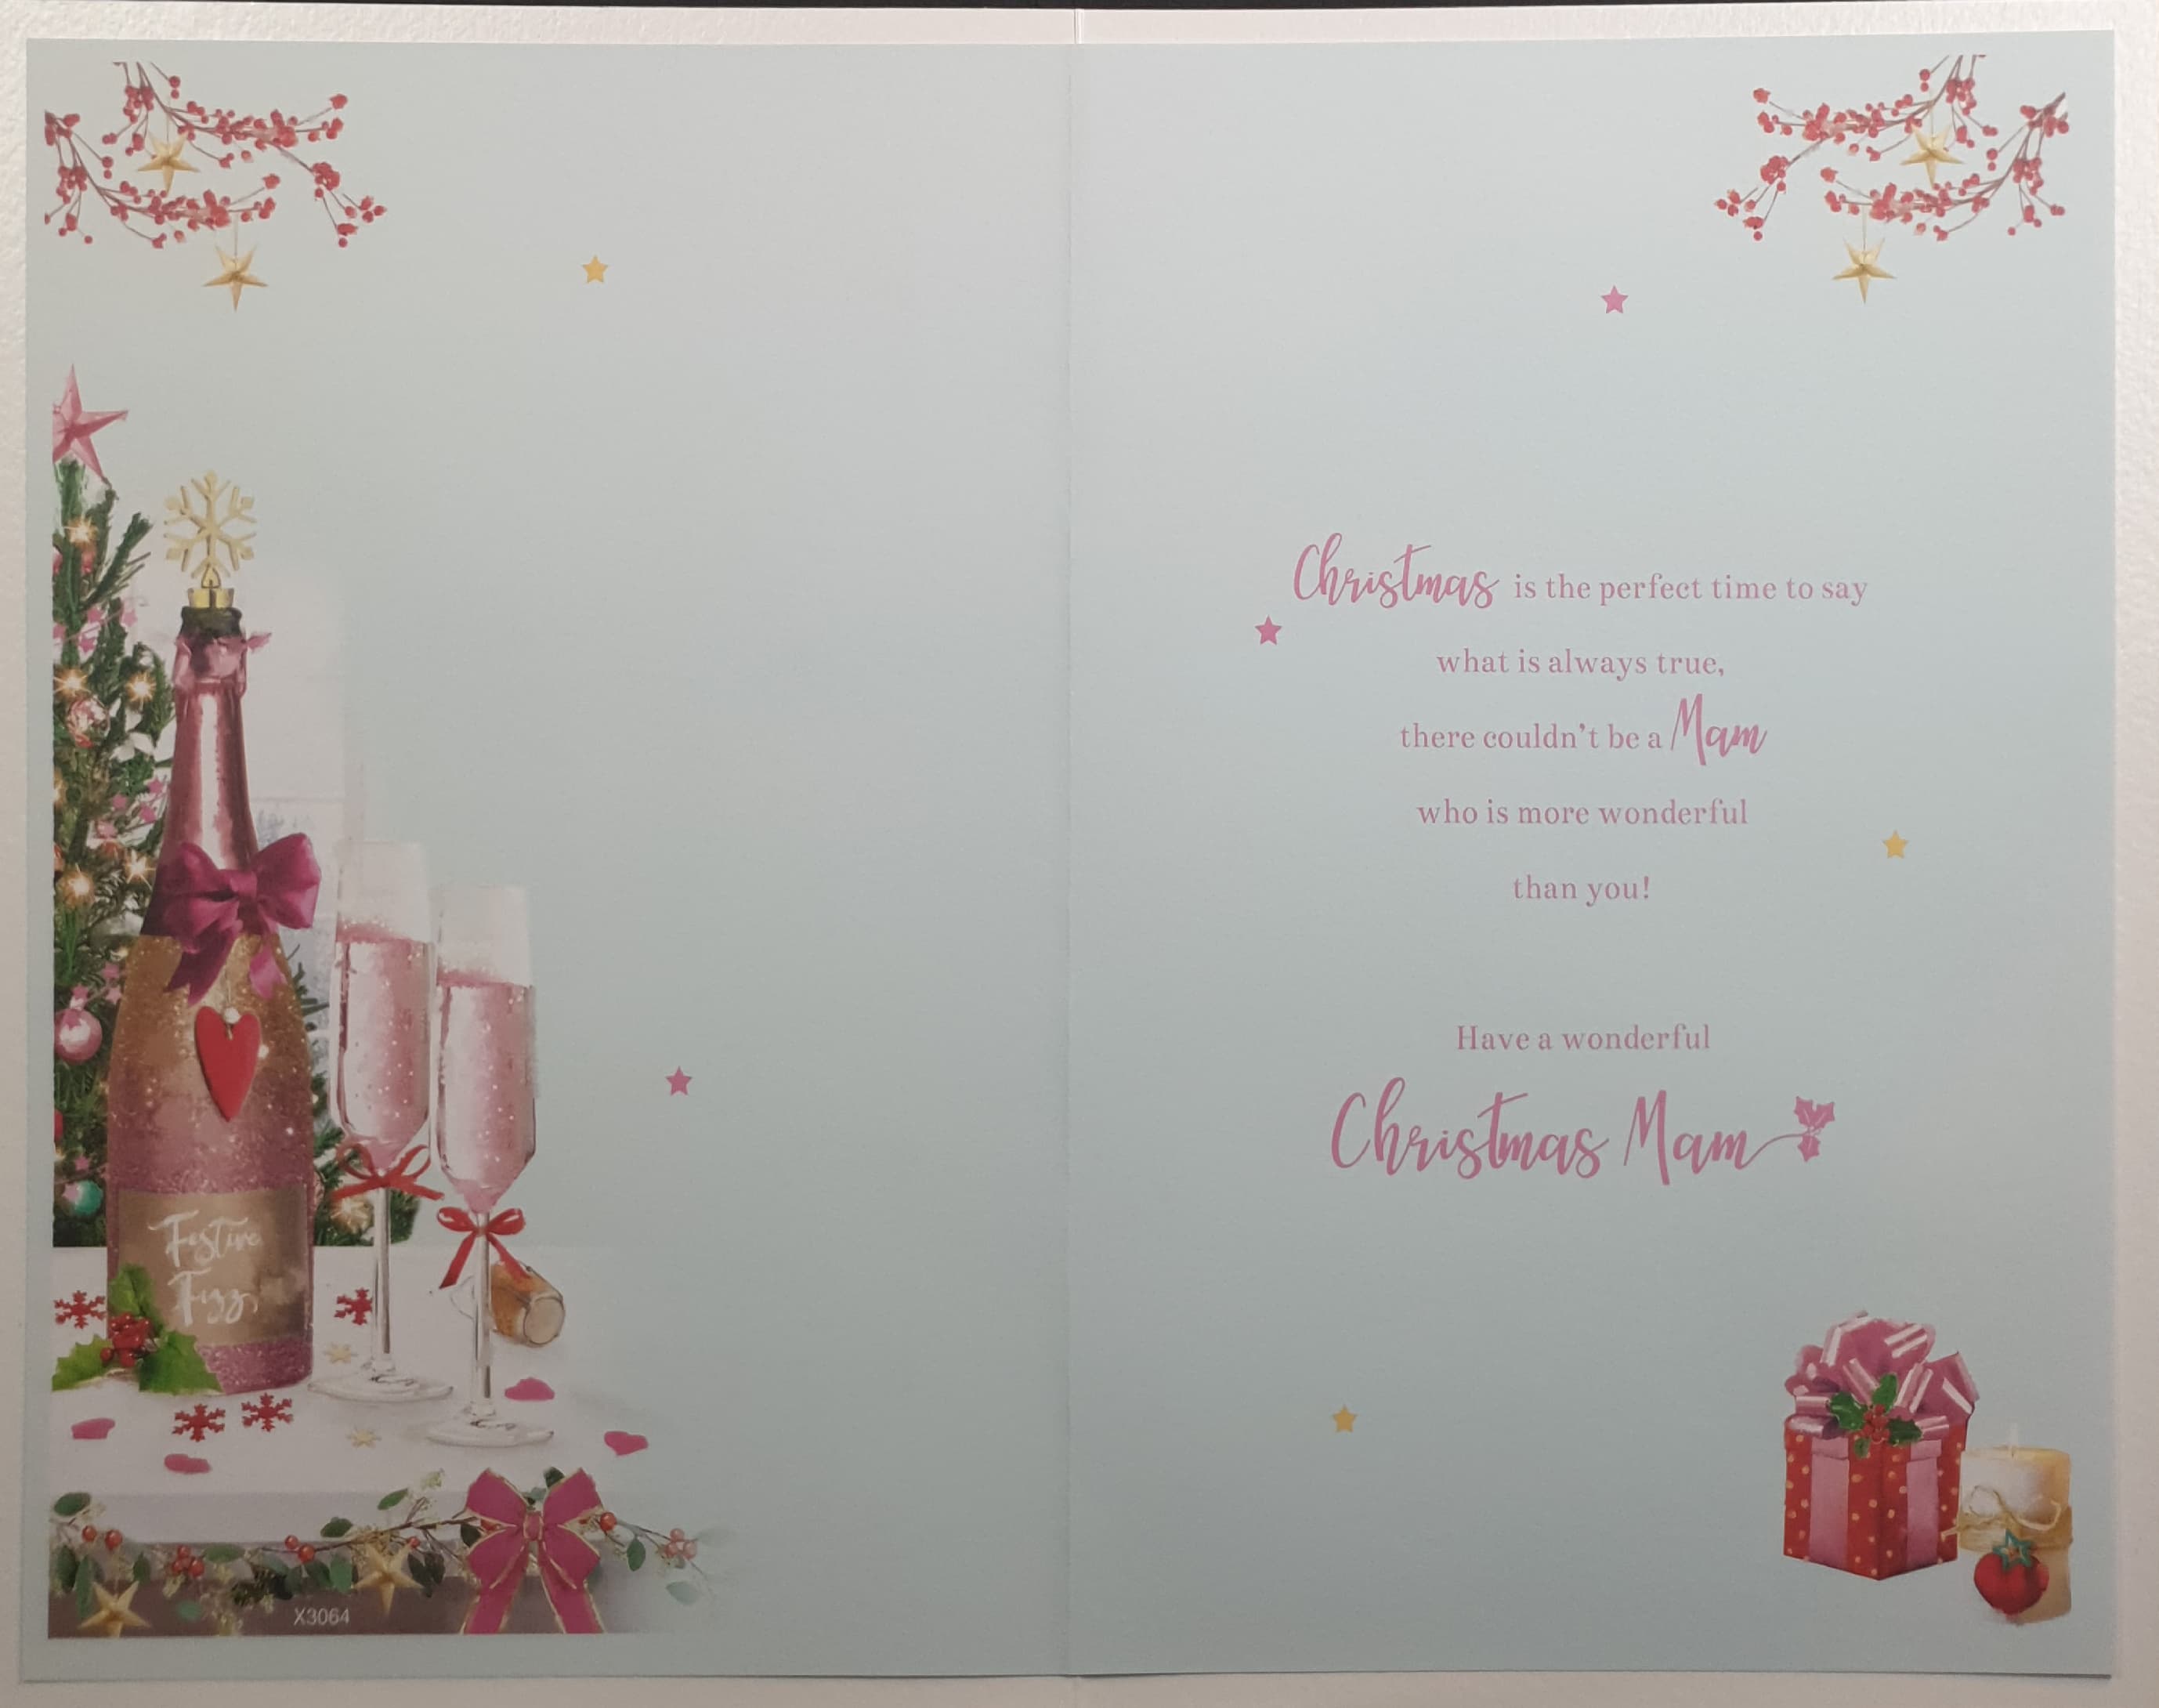 Mam Christmas Card - Pink Champagne & Gift on Table with Flowers